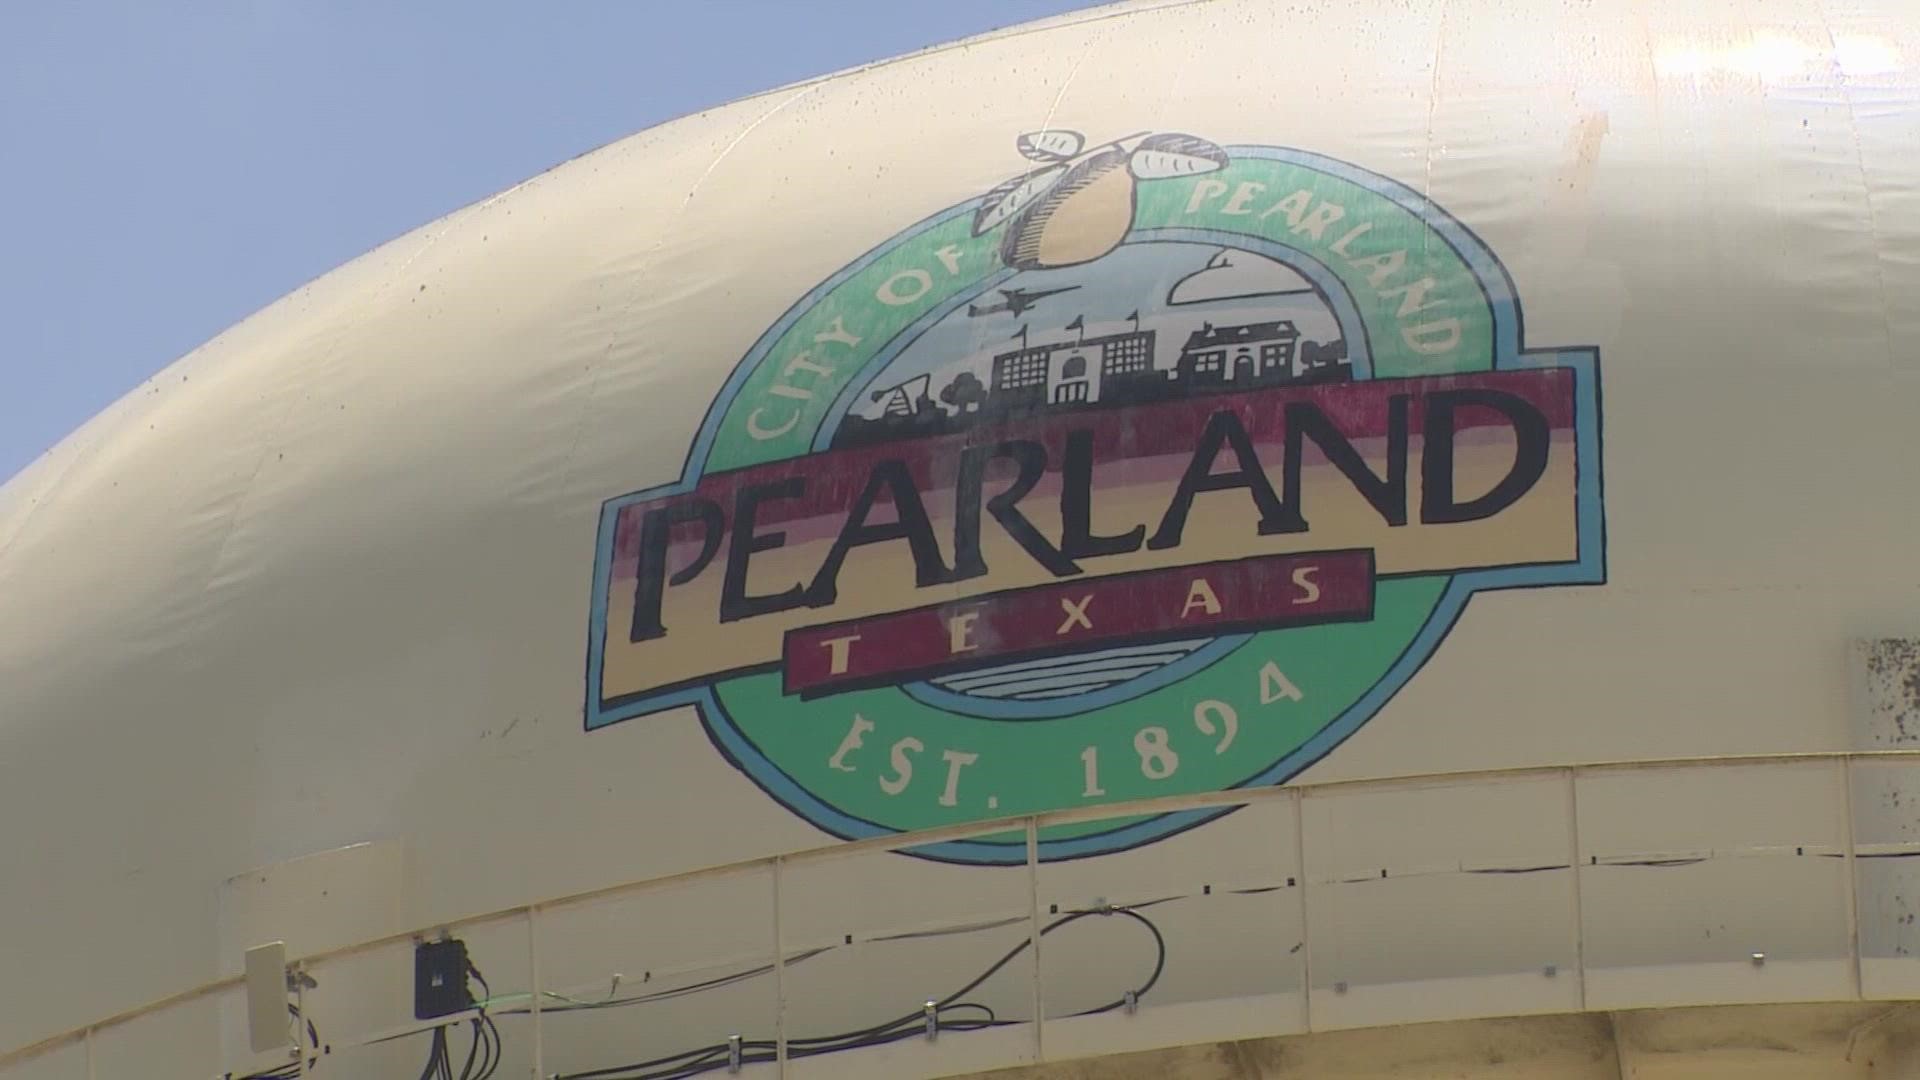 Pearland city officials said property appraisals were inflated by more than $1 billion, leading them to pass a higher budget than they should have.